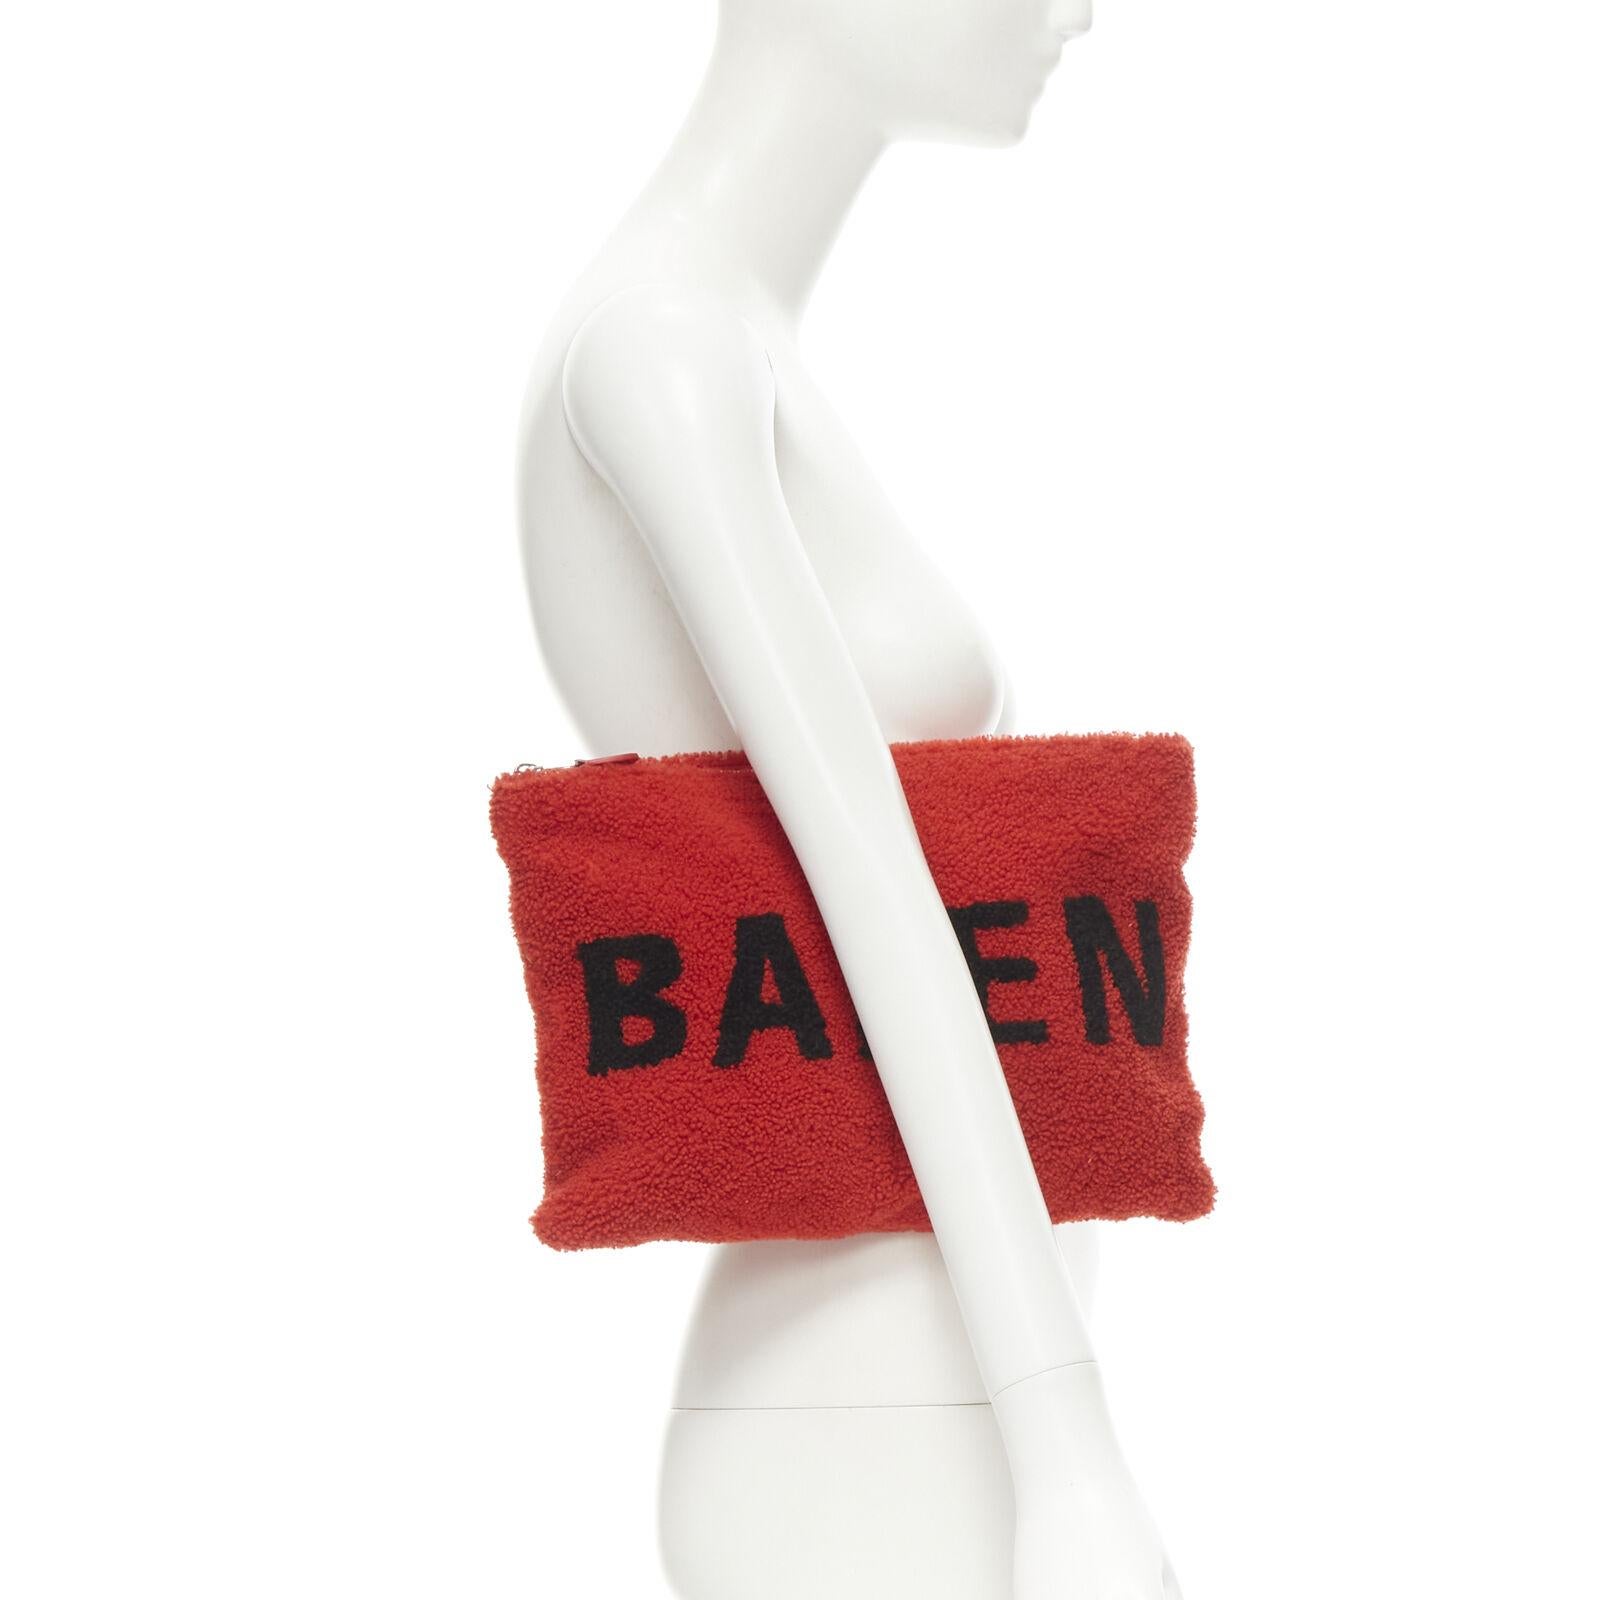 new BALENCIAGA Demna logo red black dyed merino lamb shearling zip clutch bag
Reference: TGAS/C00458
Brand: Balenciaga
Designer: Demna
Model: 4926810E91N 6490
Material: Shearling
Color: Red, Black
Pattern: Solid
Closure: Zip
Lining: Leather
Extra